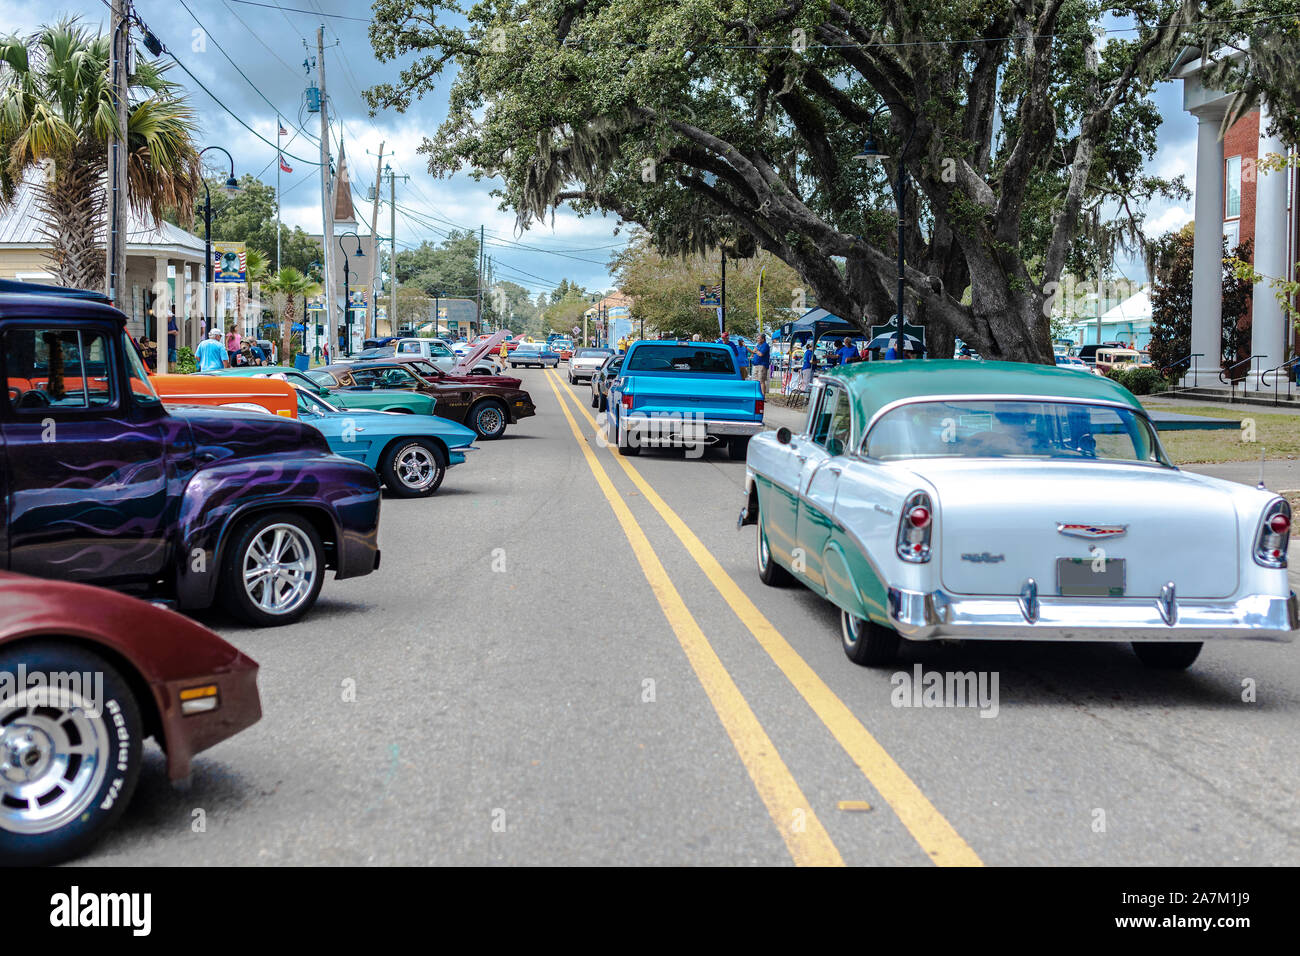 A Main Street Car Show with classic cars parked on the sides and vintage cars driving on the road. Stock Photo